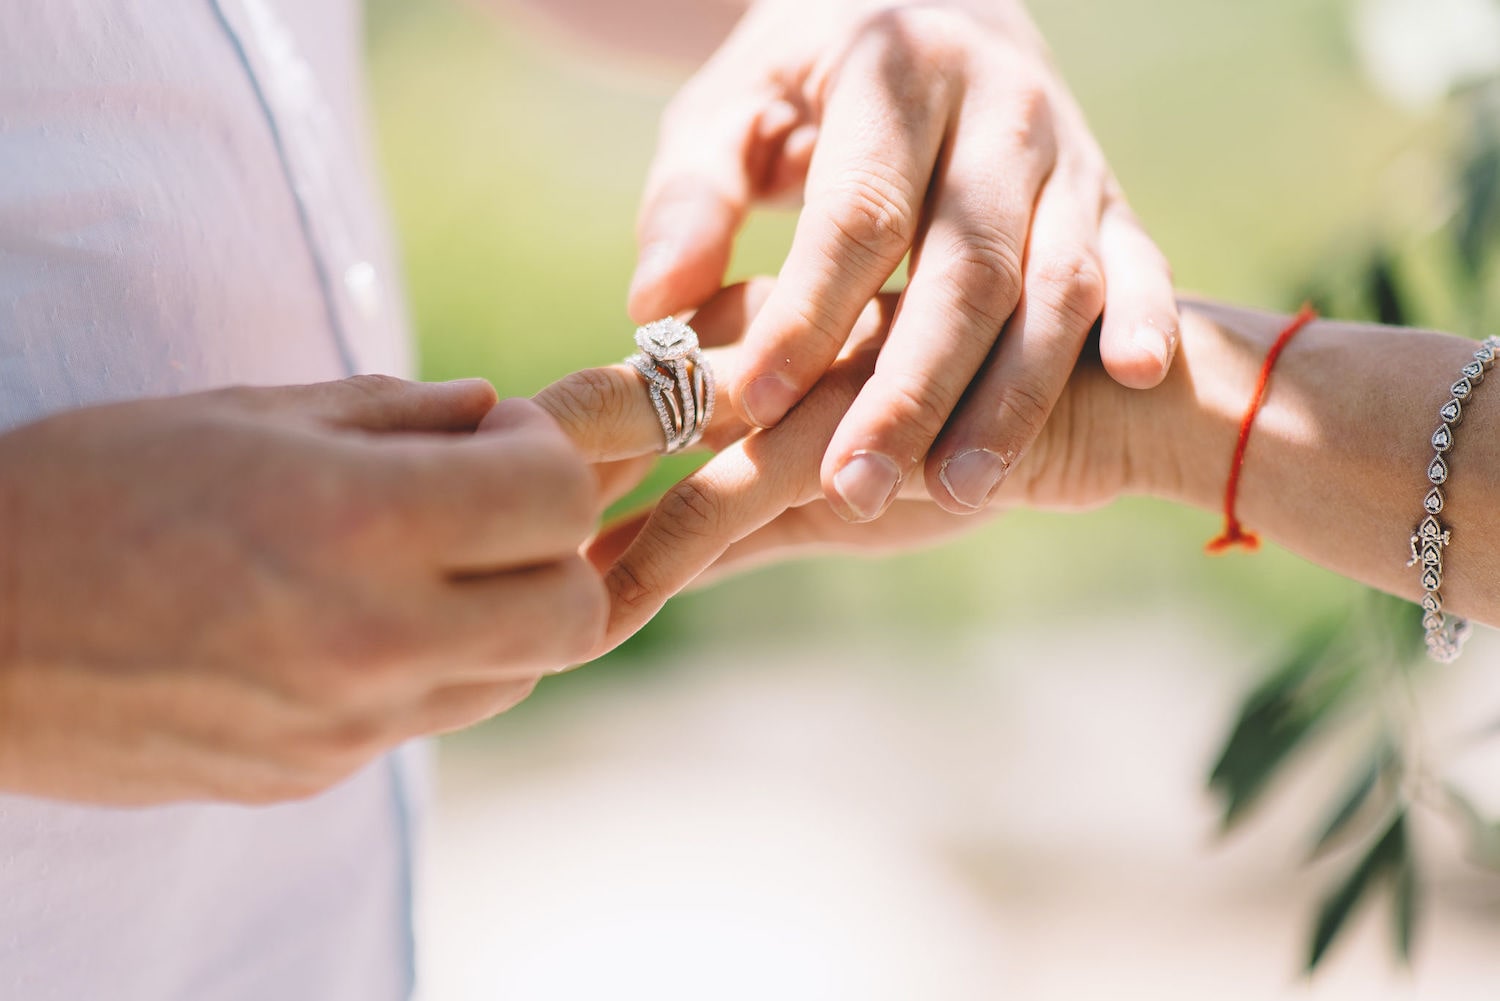 exchange of rings during an elopement symbolic ceremony in Lavaux